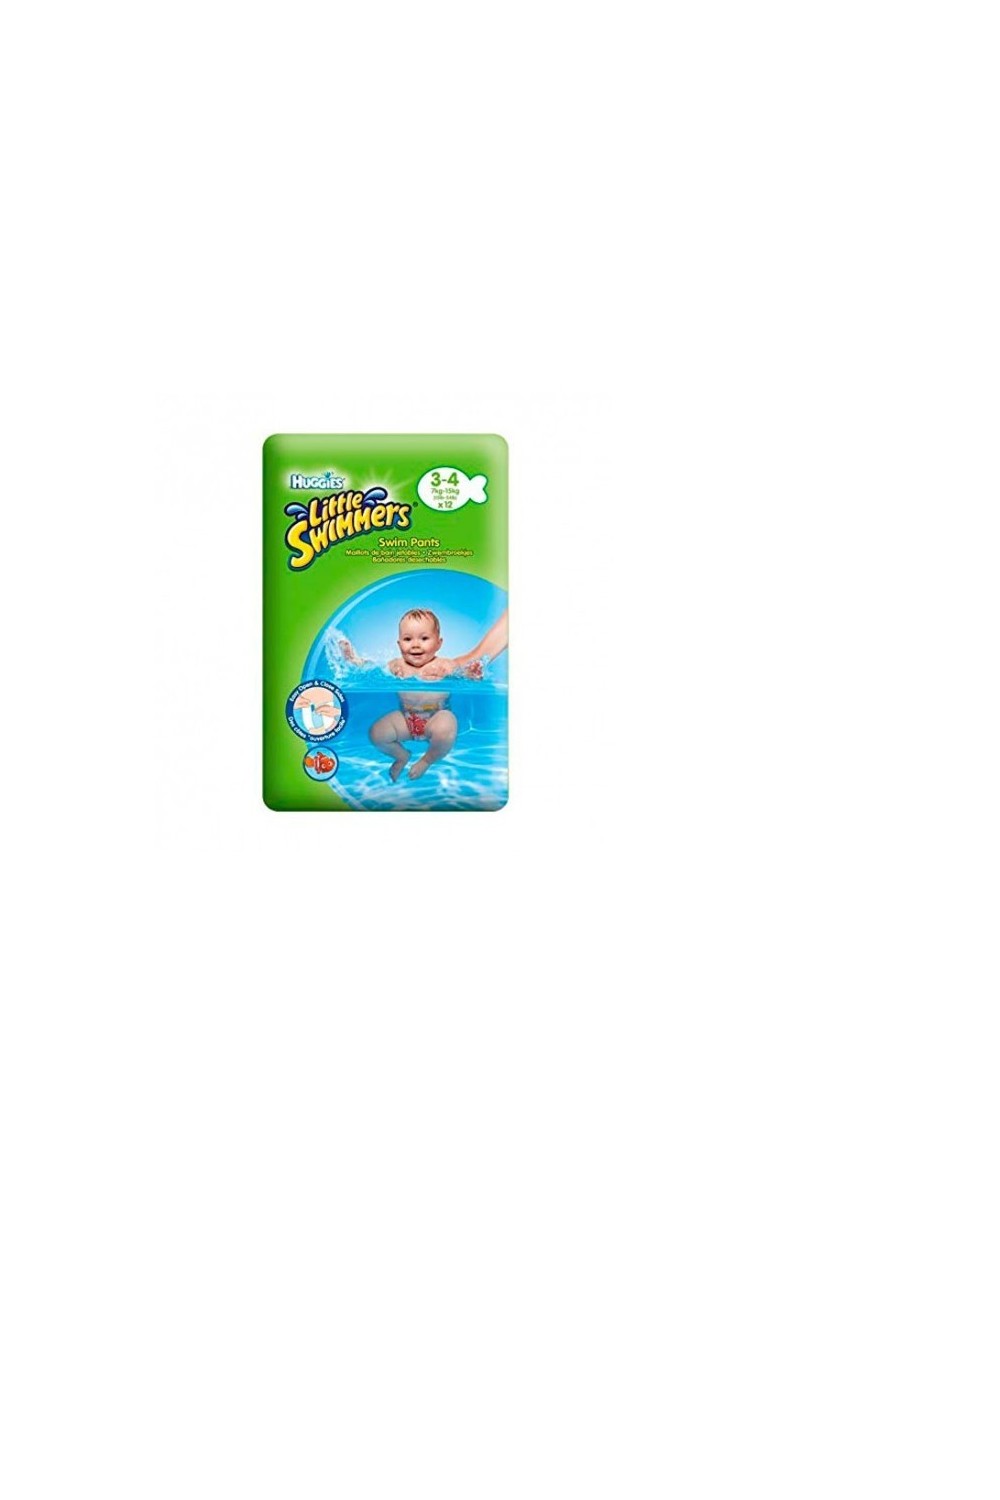 Huggies Little Swimmers Disposable Diapers Swimming Talle 3-4